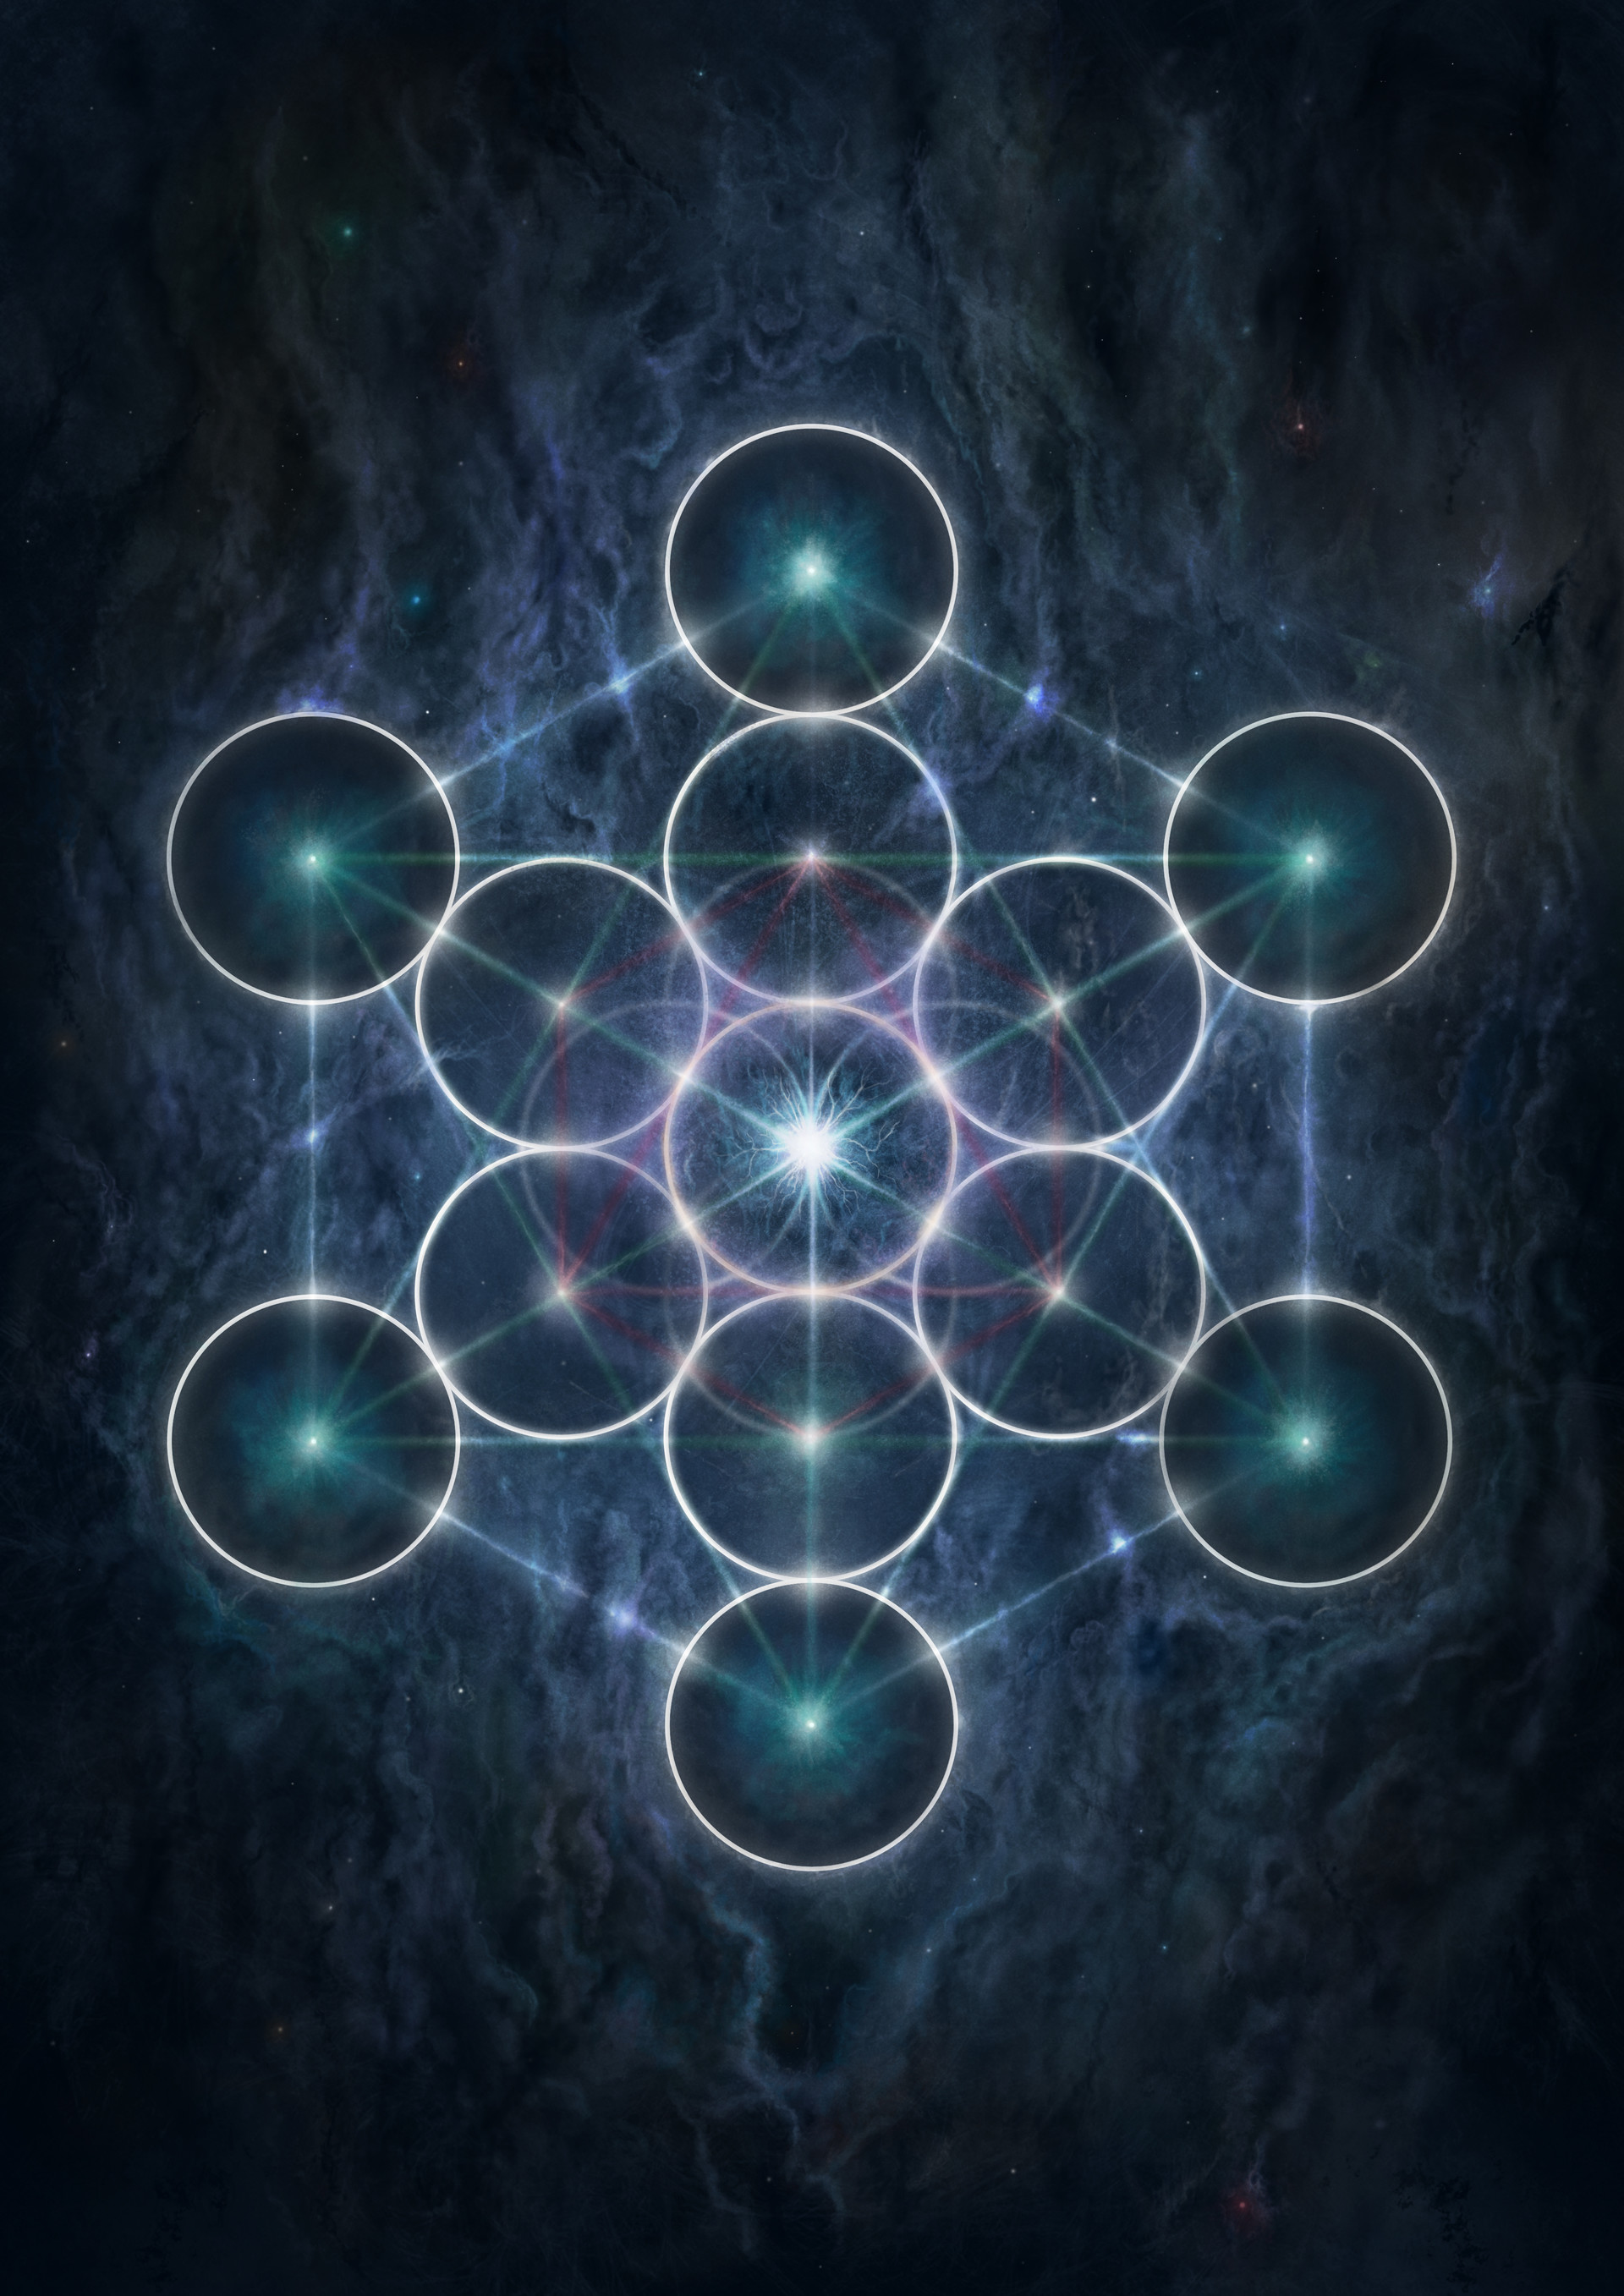 Metatrons Cube by Victory Alex on Dribbble